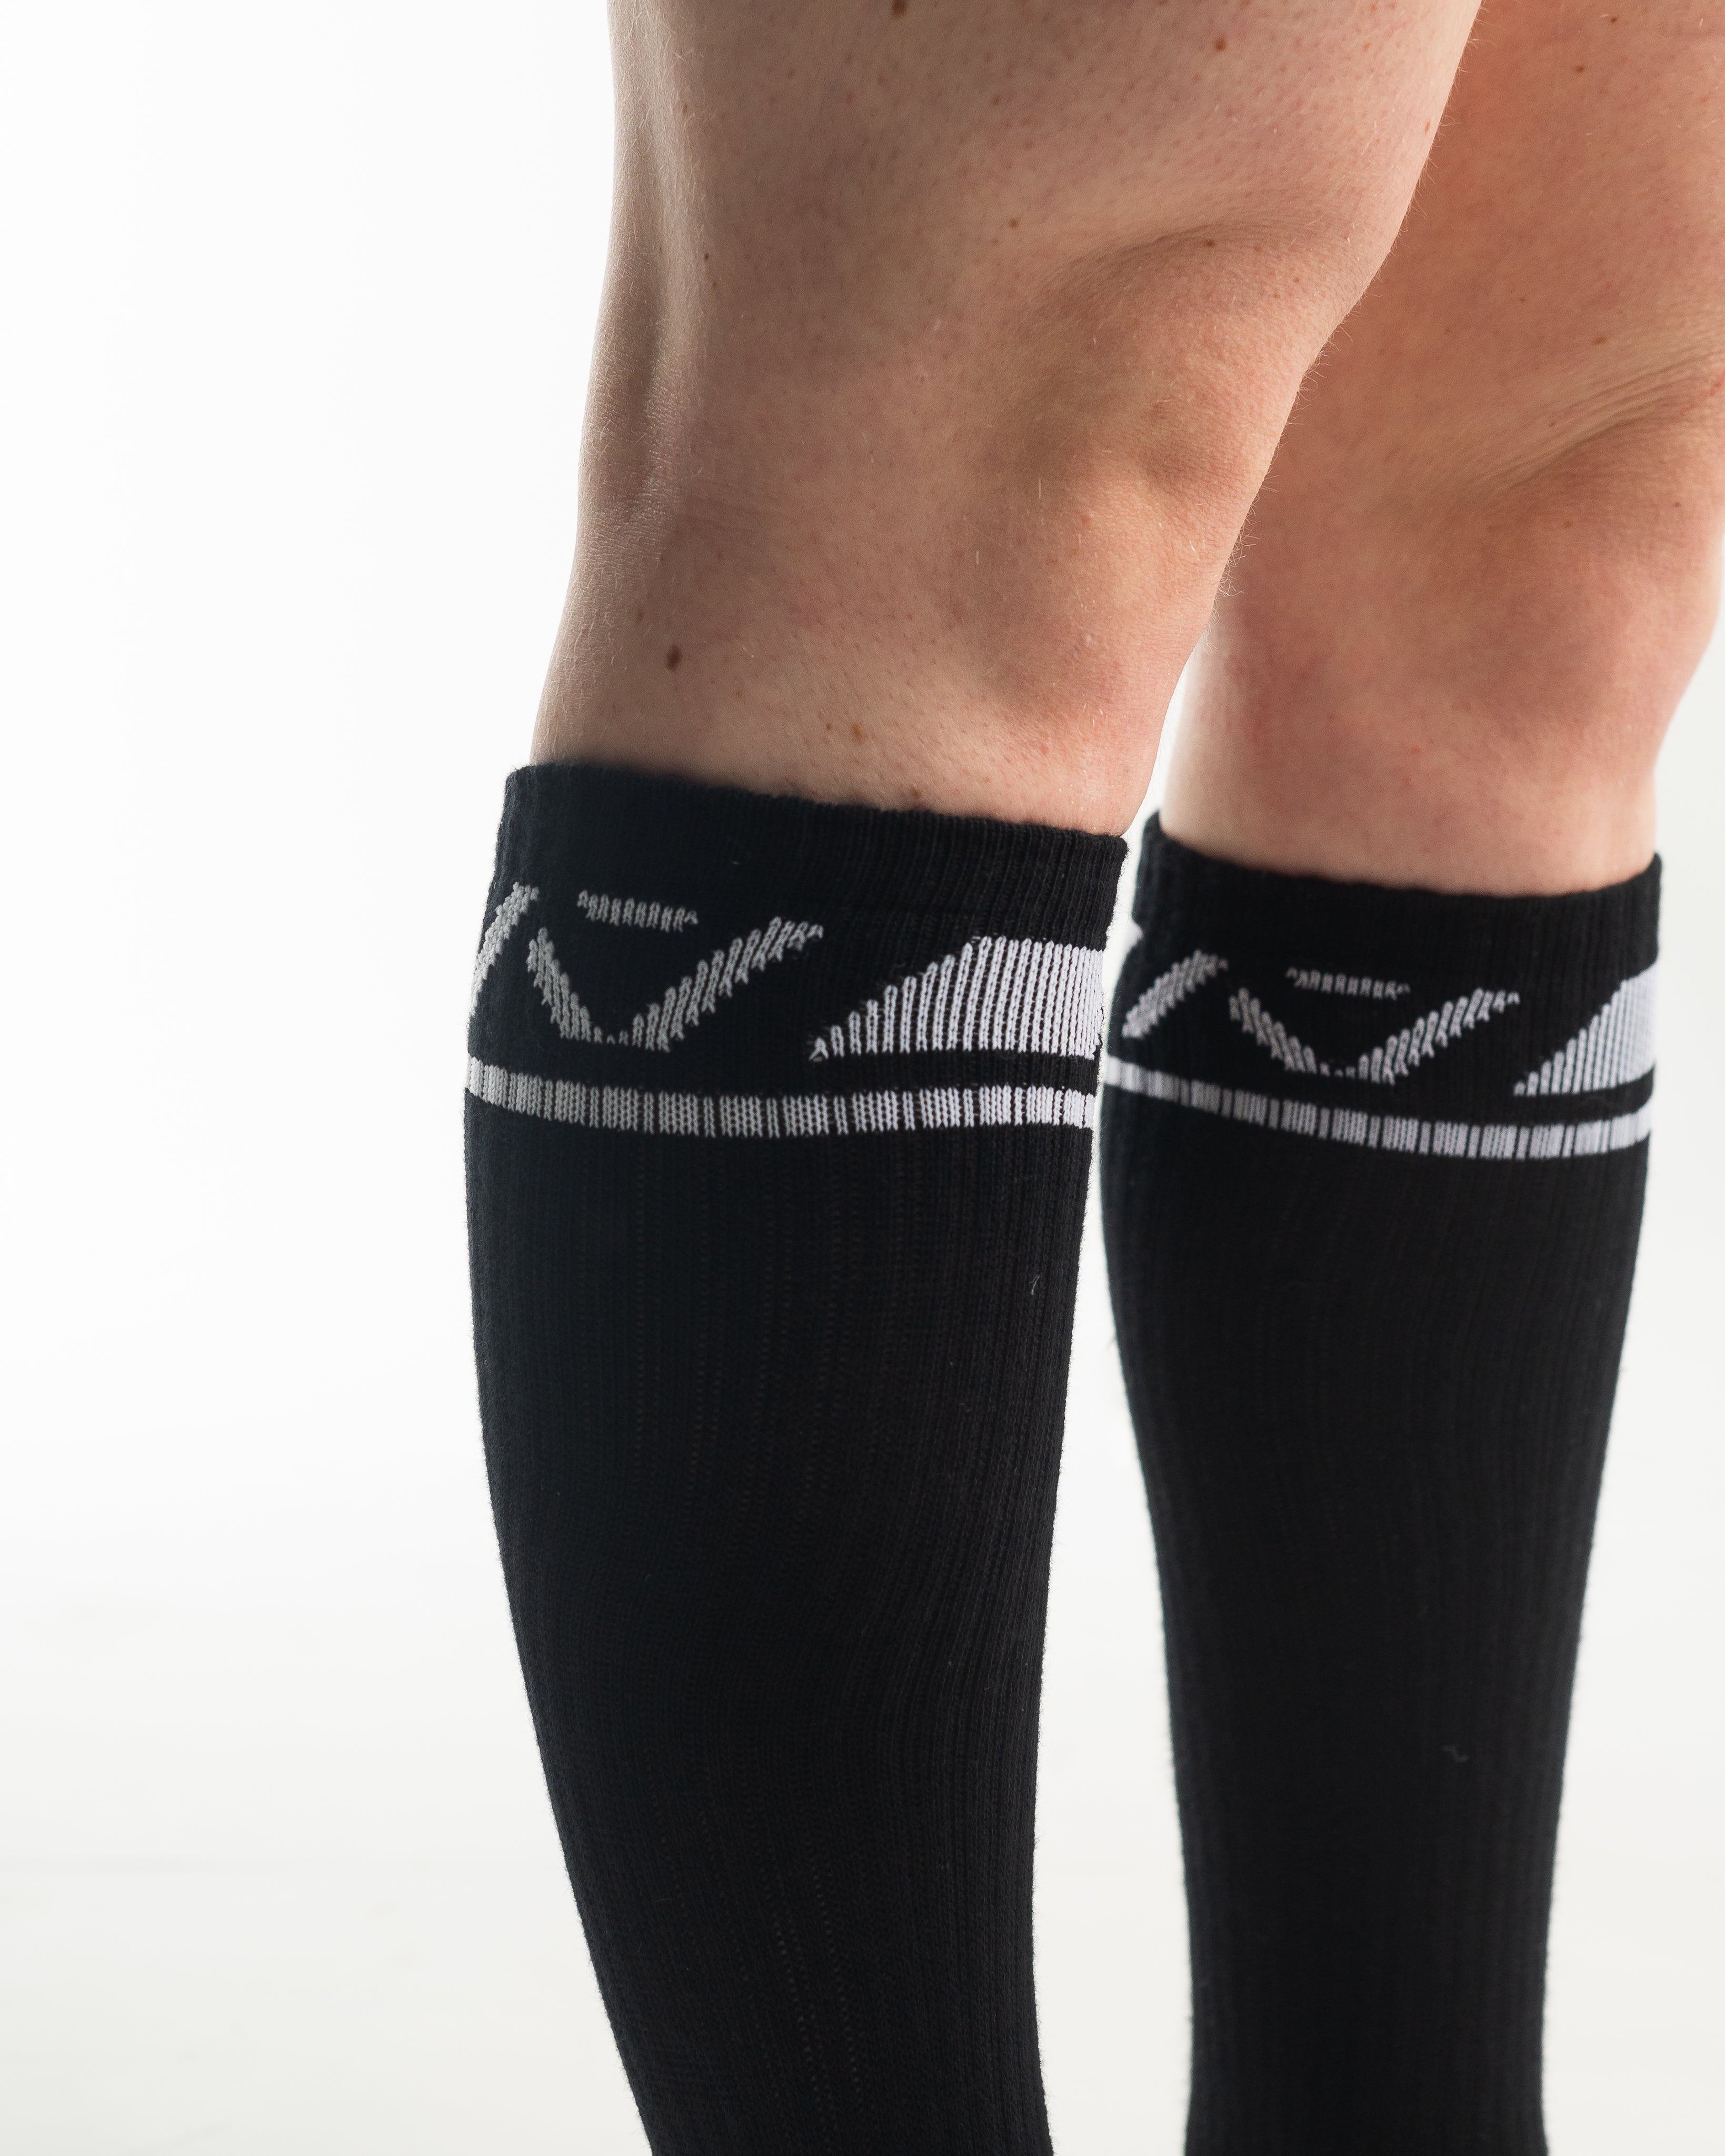 A7 Domino Deadlift socks are designed specifically for pulls and keep your shins protected from scrapes. A7 deadlift socks are a perfect pair to wear in training or powerlifting competition. The IPF Approved Kit includes Powerlifting Singlet, A7 Meet Shirt, A7 Zebra Wrist Wraps, A7 Deadlift Socks, Hourglass Knee Sleeves (Stiff Knee Sleeves and Rigor Mortis Knee Sleeves). Genouillères powerlifting shipping to France, Spain, Ireland, Germany, Italy, Sweden and EU.